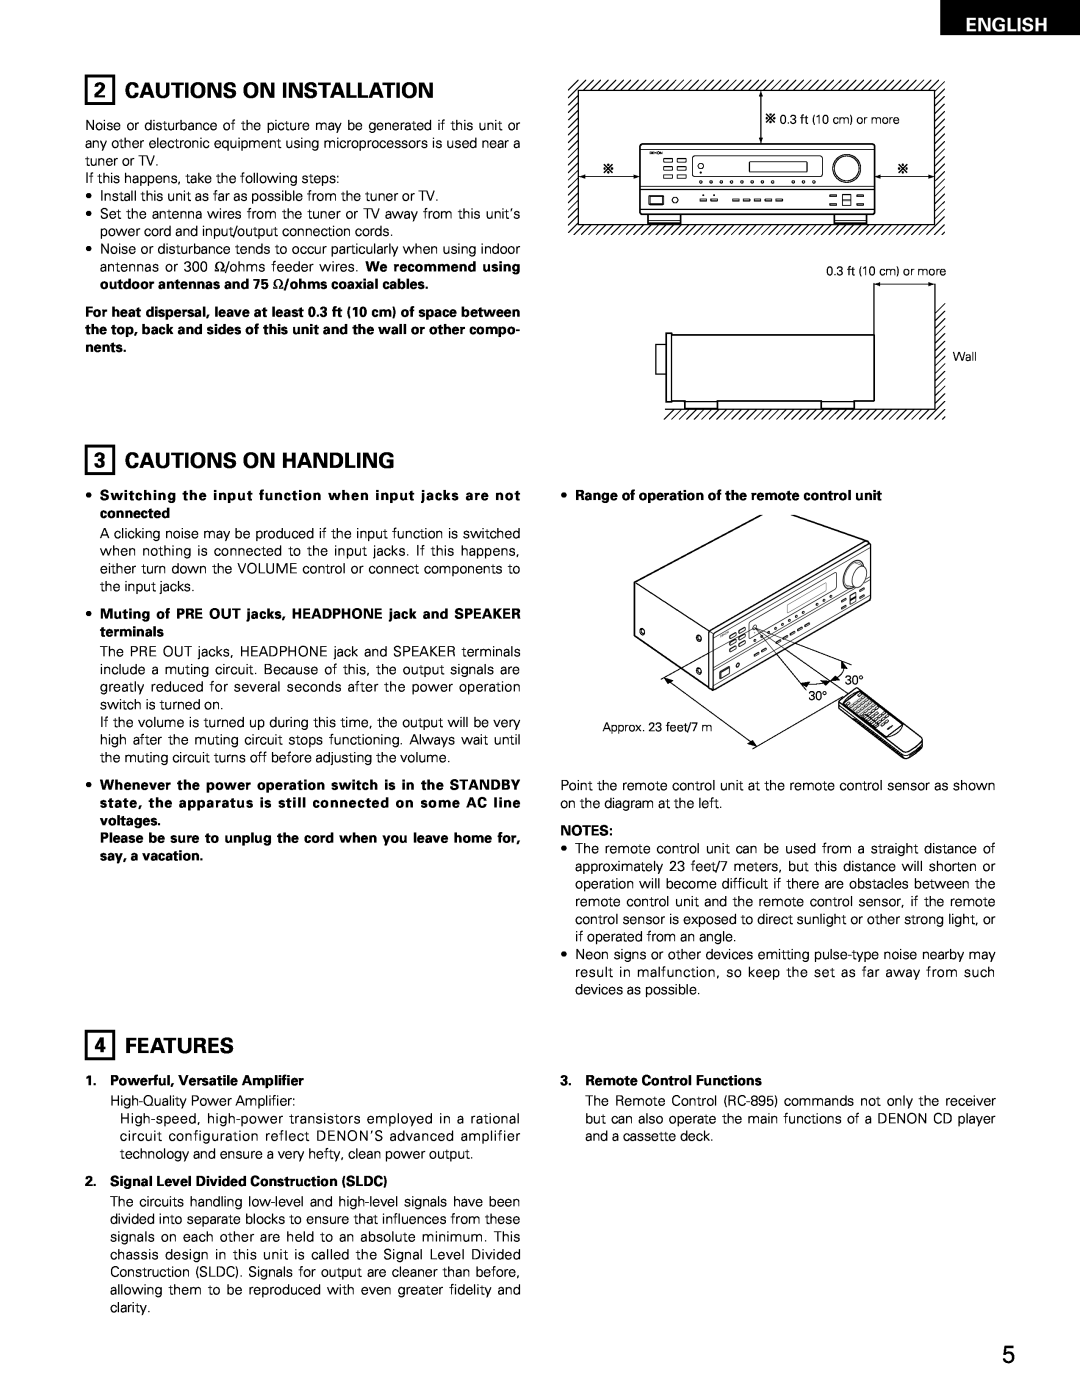 Denon DRA-295 manual Cautions On Installation, 3CAUTIONS ON HANDLING, 4FEATURES, English 